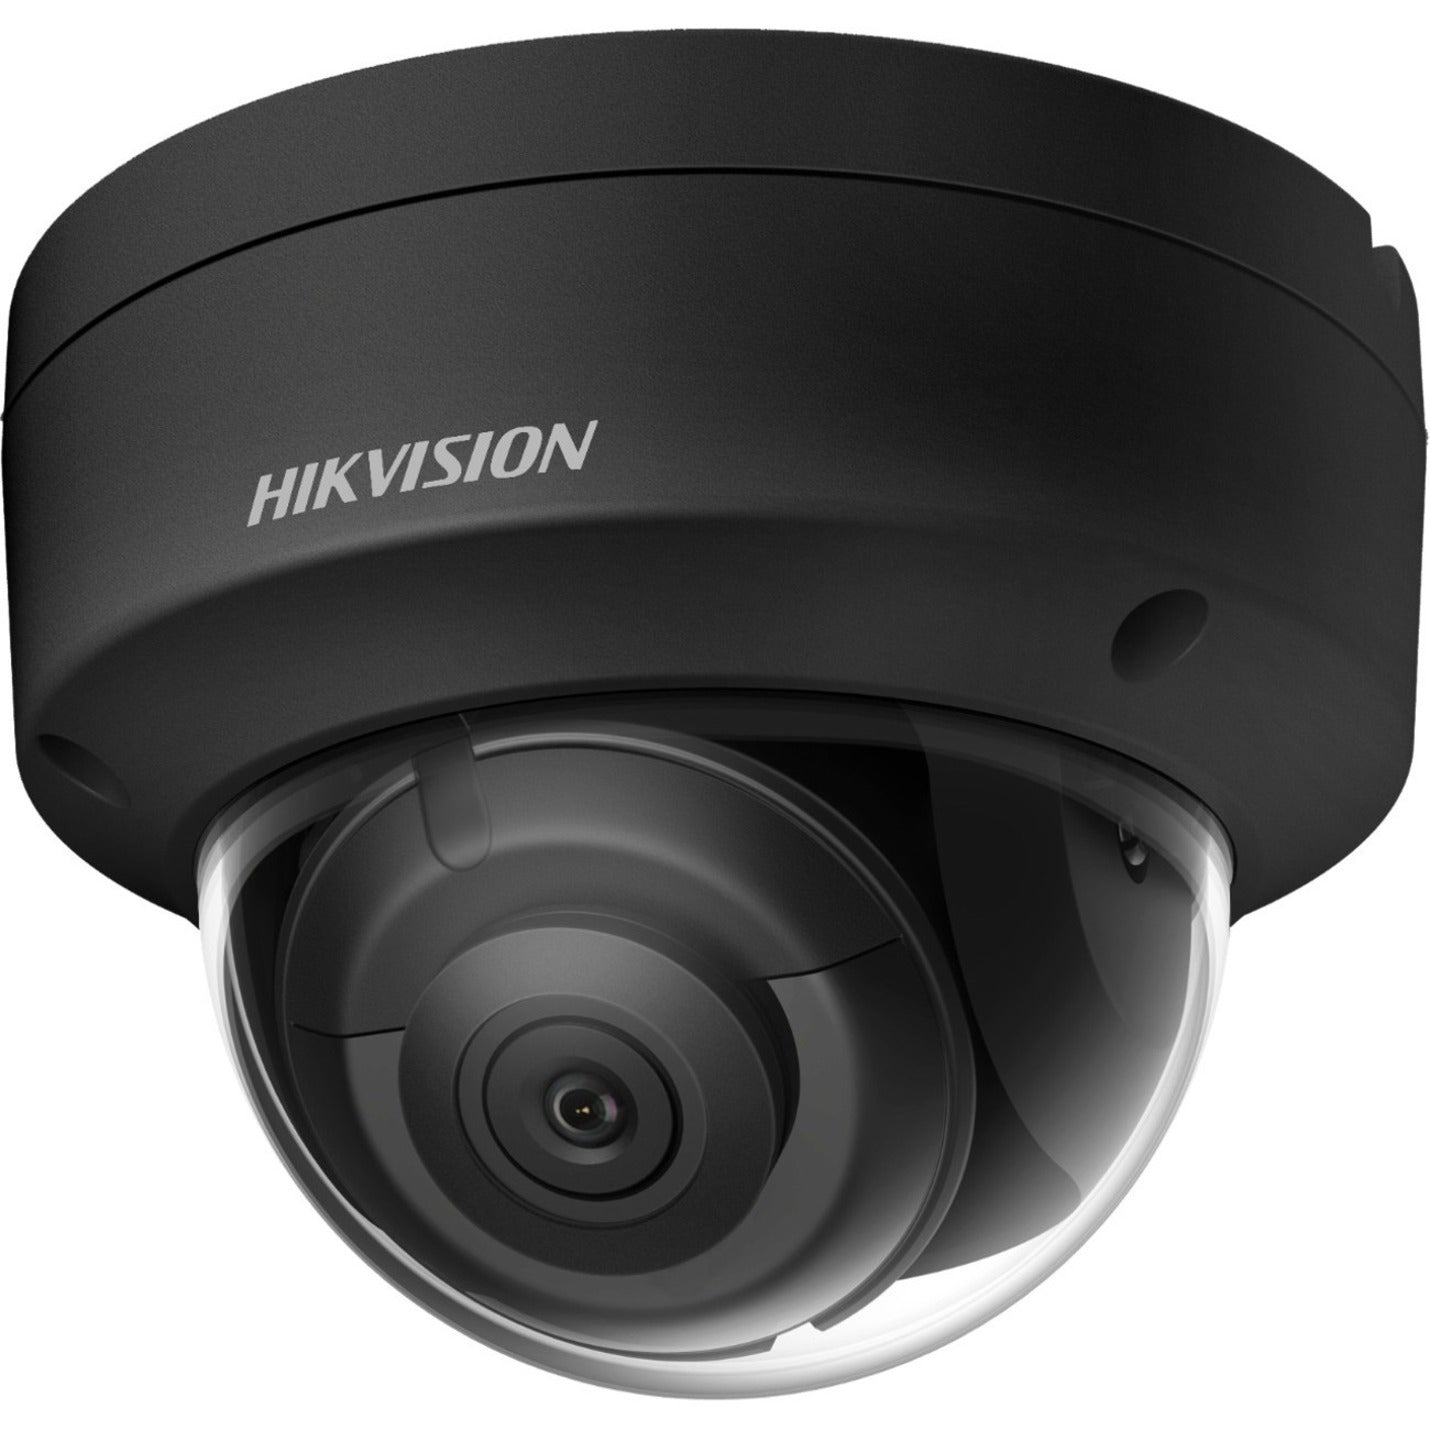 Hikvision DS-2CD2143G2-IU 4MM 4 MP AcuSenseFixed Dome Network Camera, 2688 x 1520, 30 fps, Color, 98.43 ft Night Vision